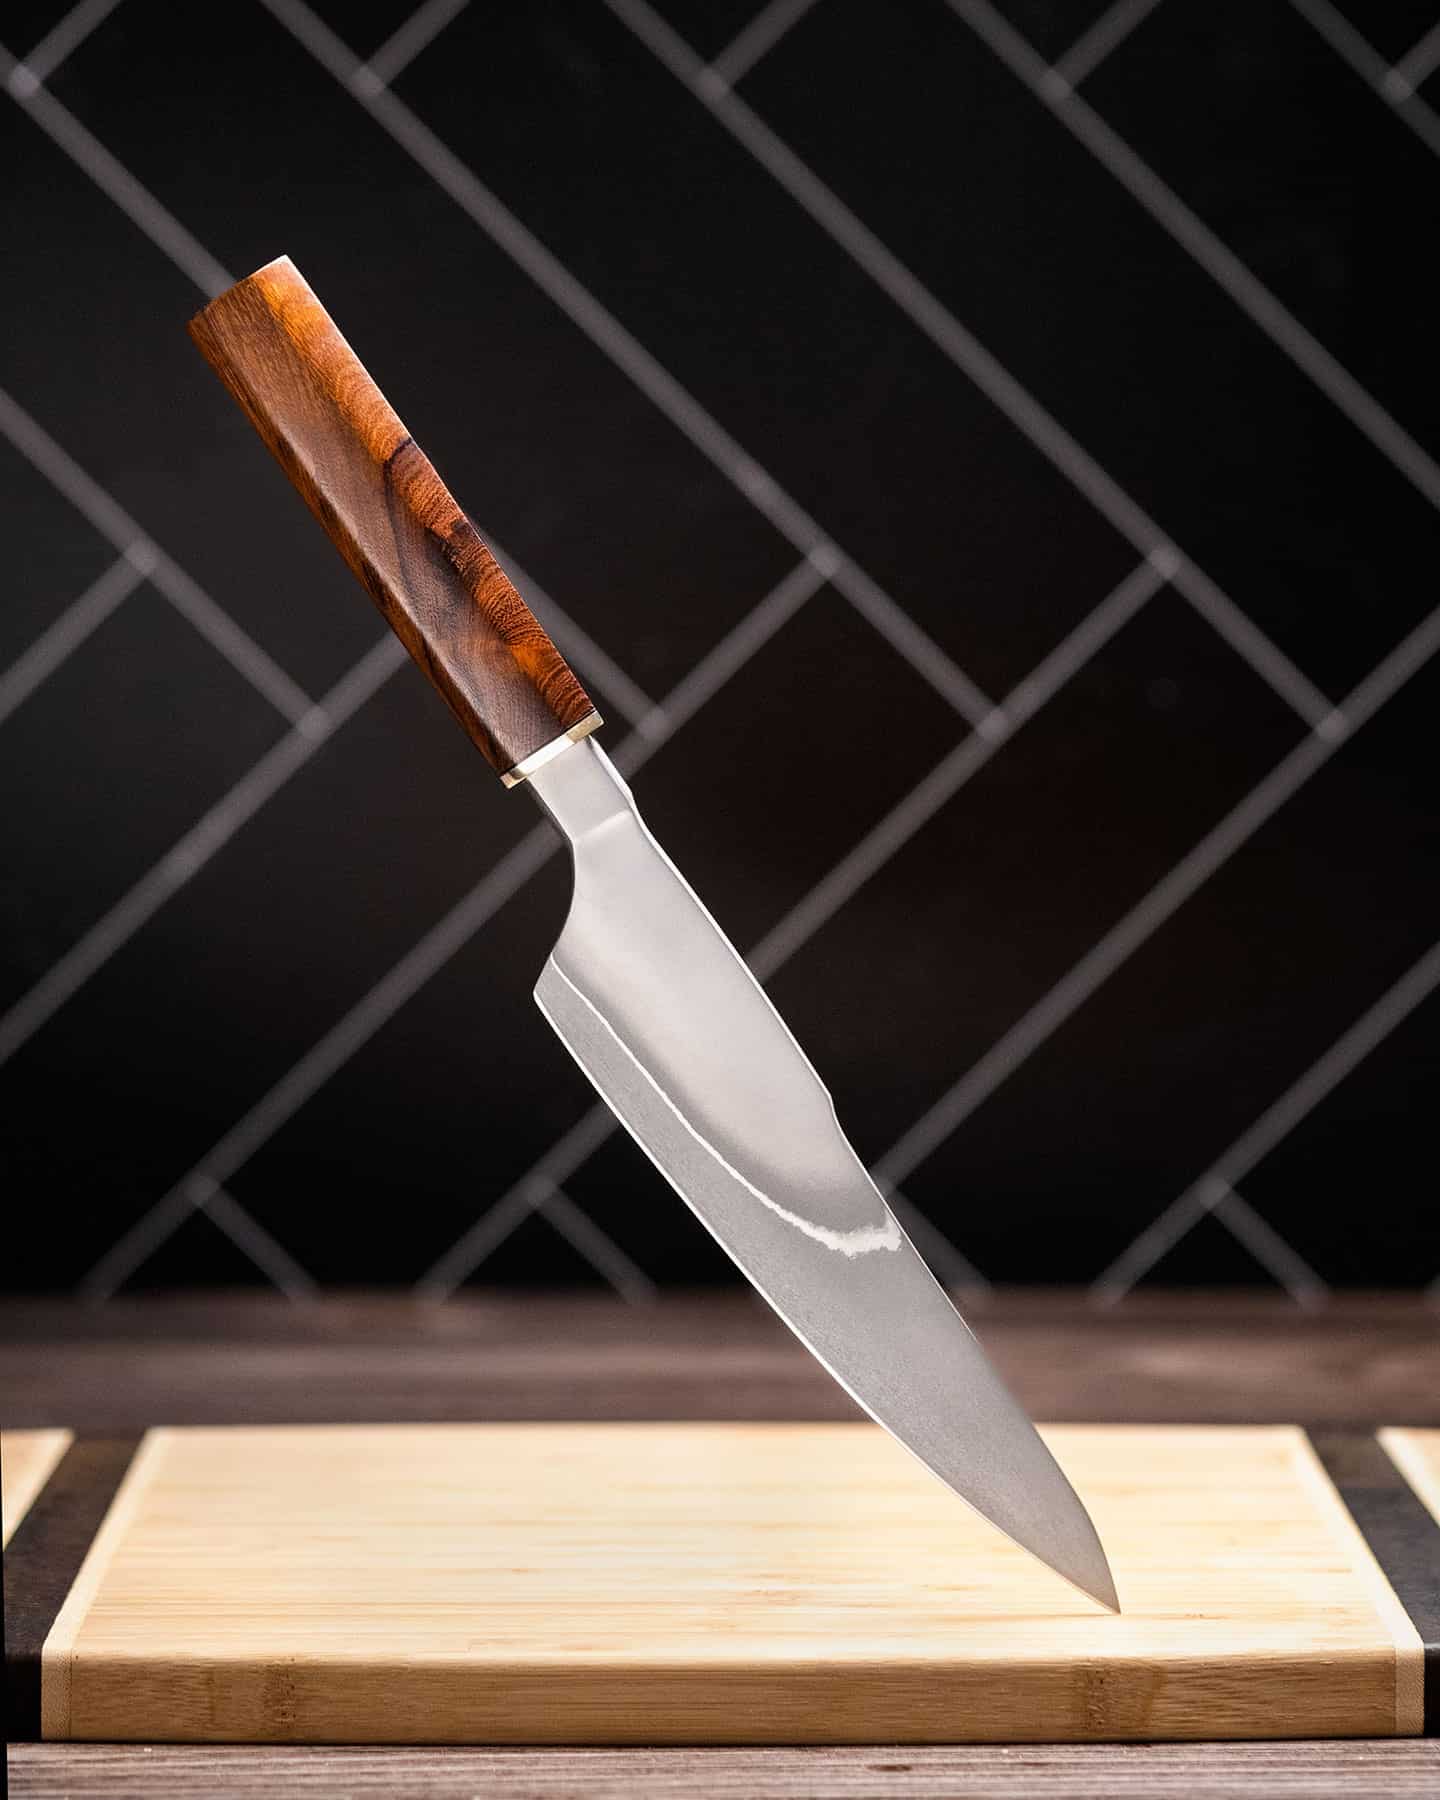 The Xin Cutlery XinCraft 6.4 inch petty chef knife is light, sharp and fun to use in the kitchen.